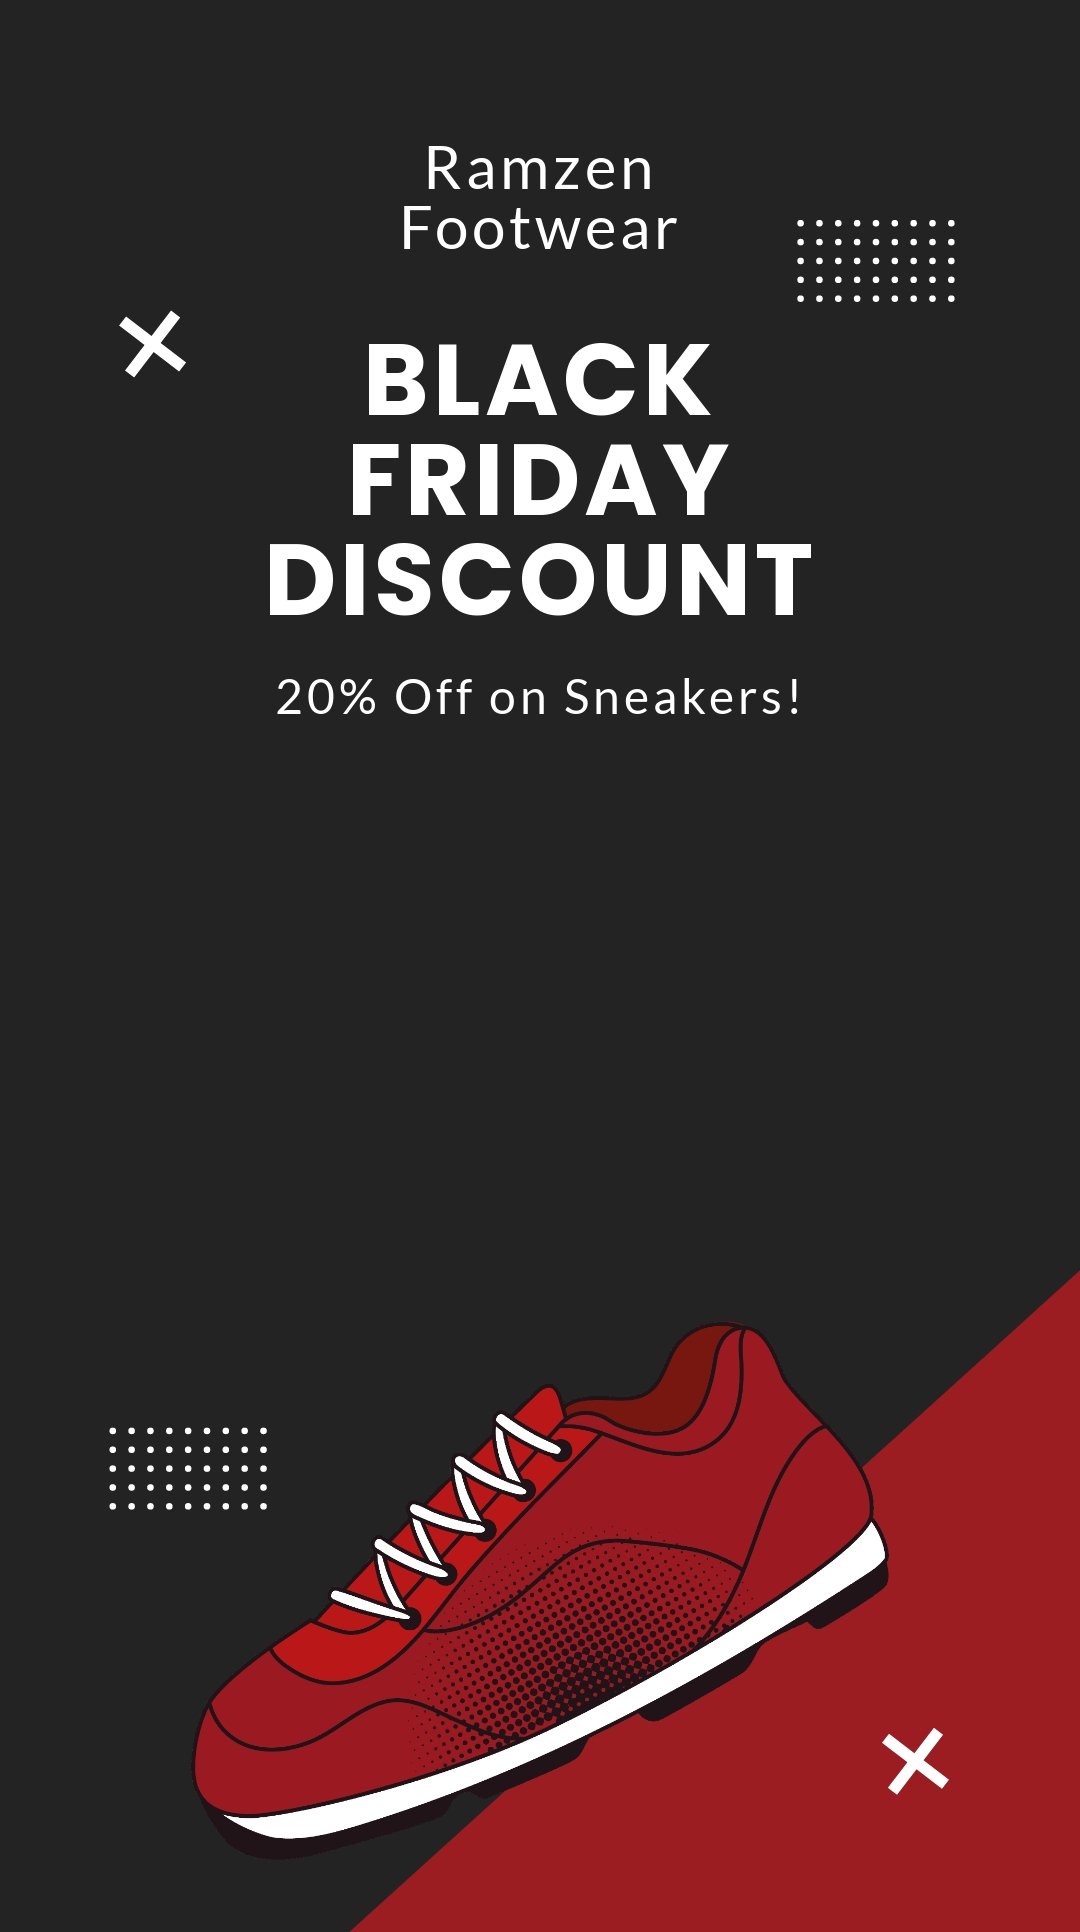 Free Black Friday Discount Snapchat Geofilter Template